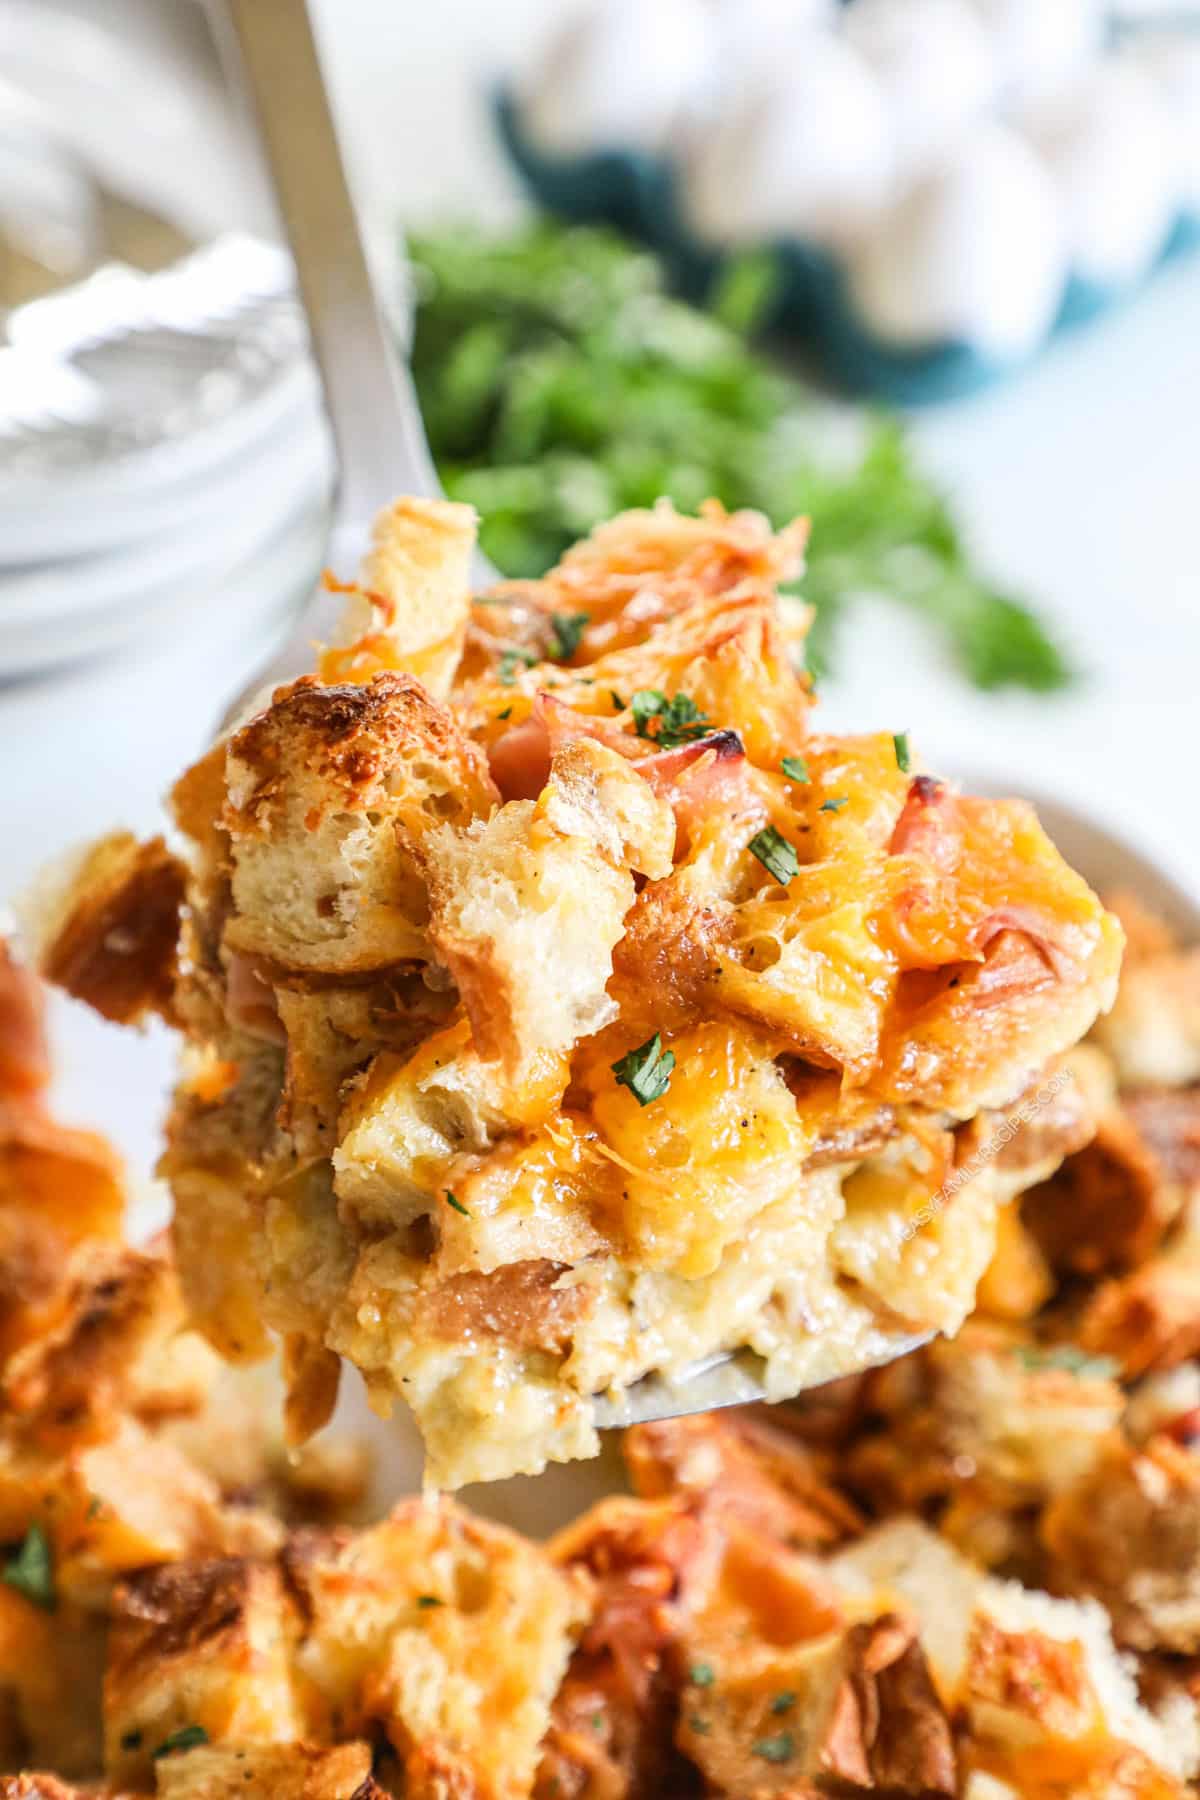 Spatula lifting serving of Ham & Cheese Croissant Breakfast Casserole from dish